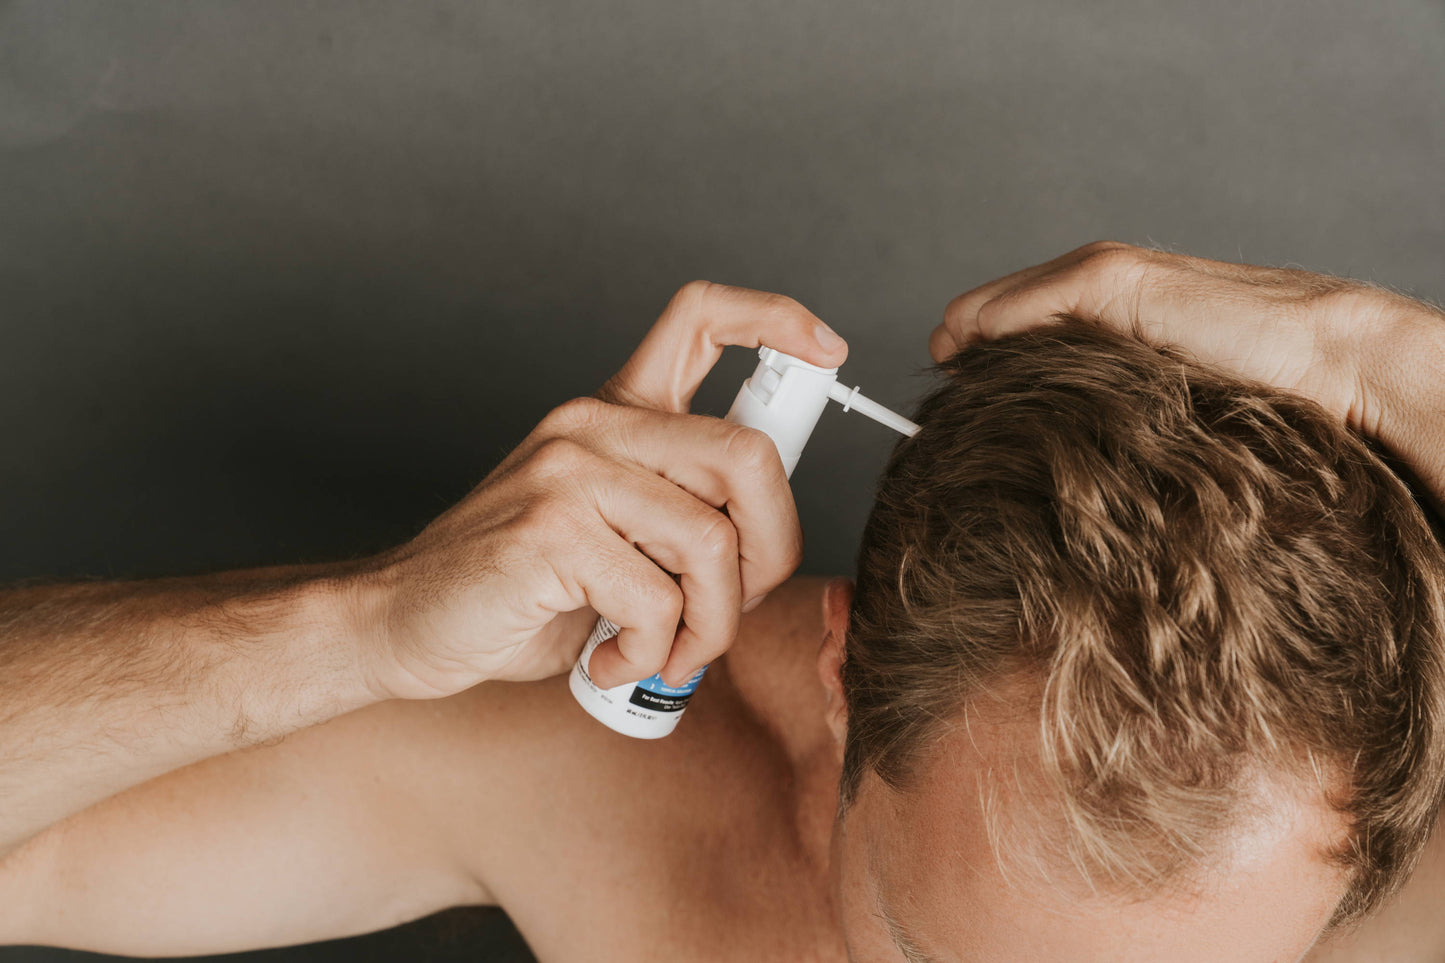 How Does Minoxidil Work For Hair Loss?